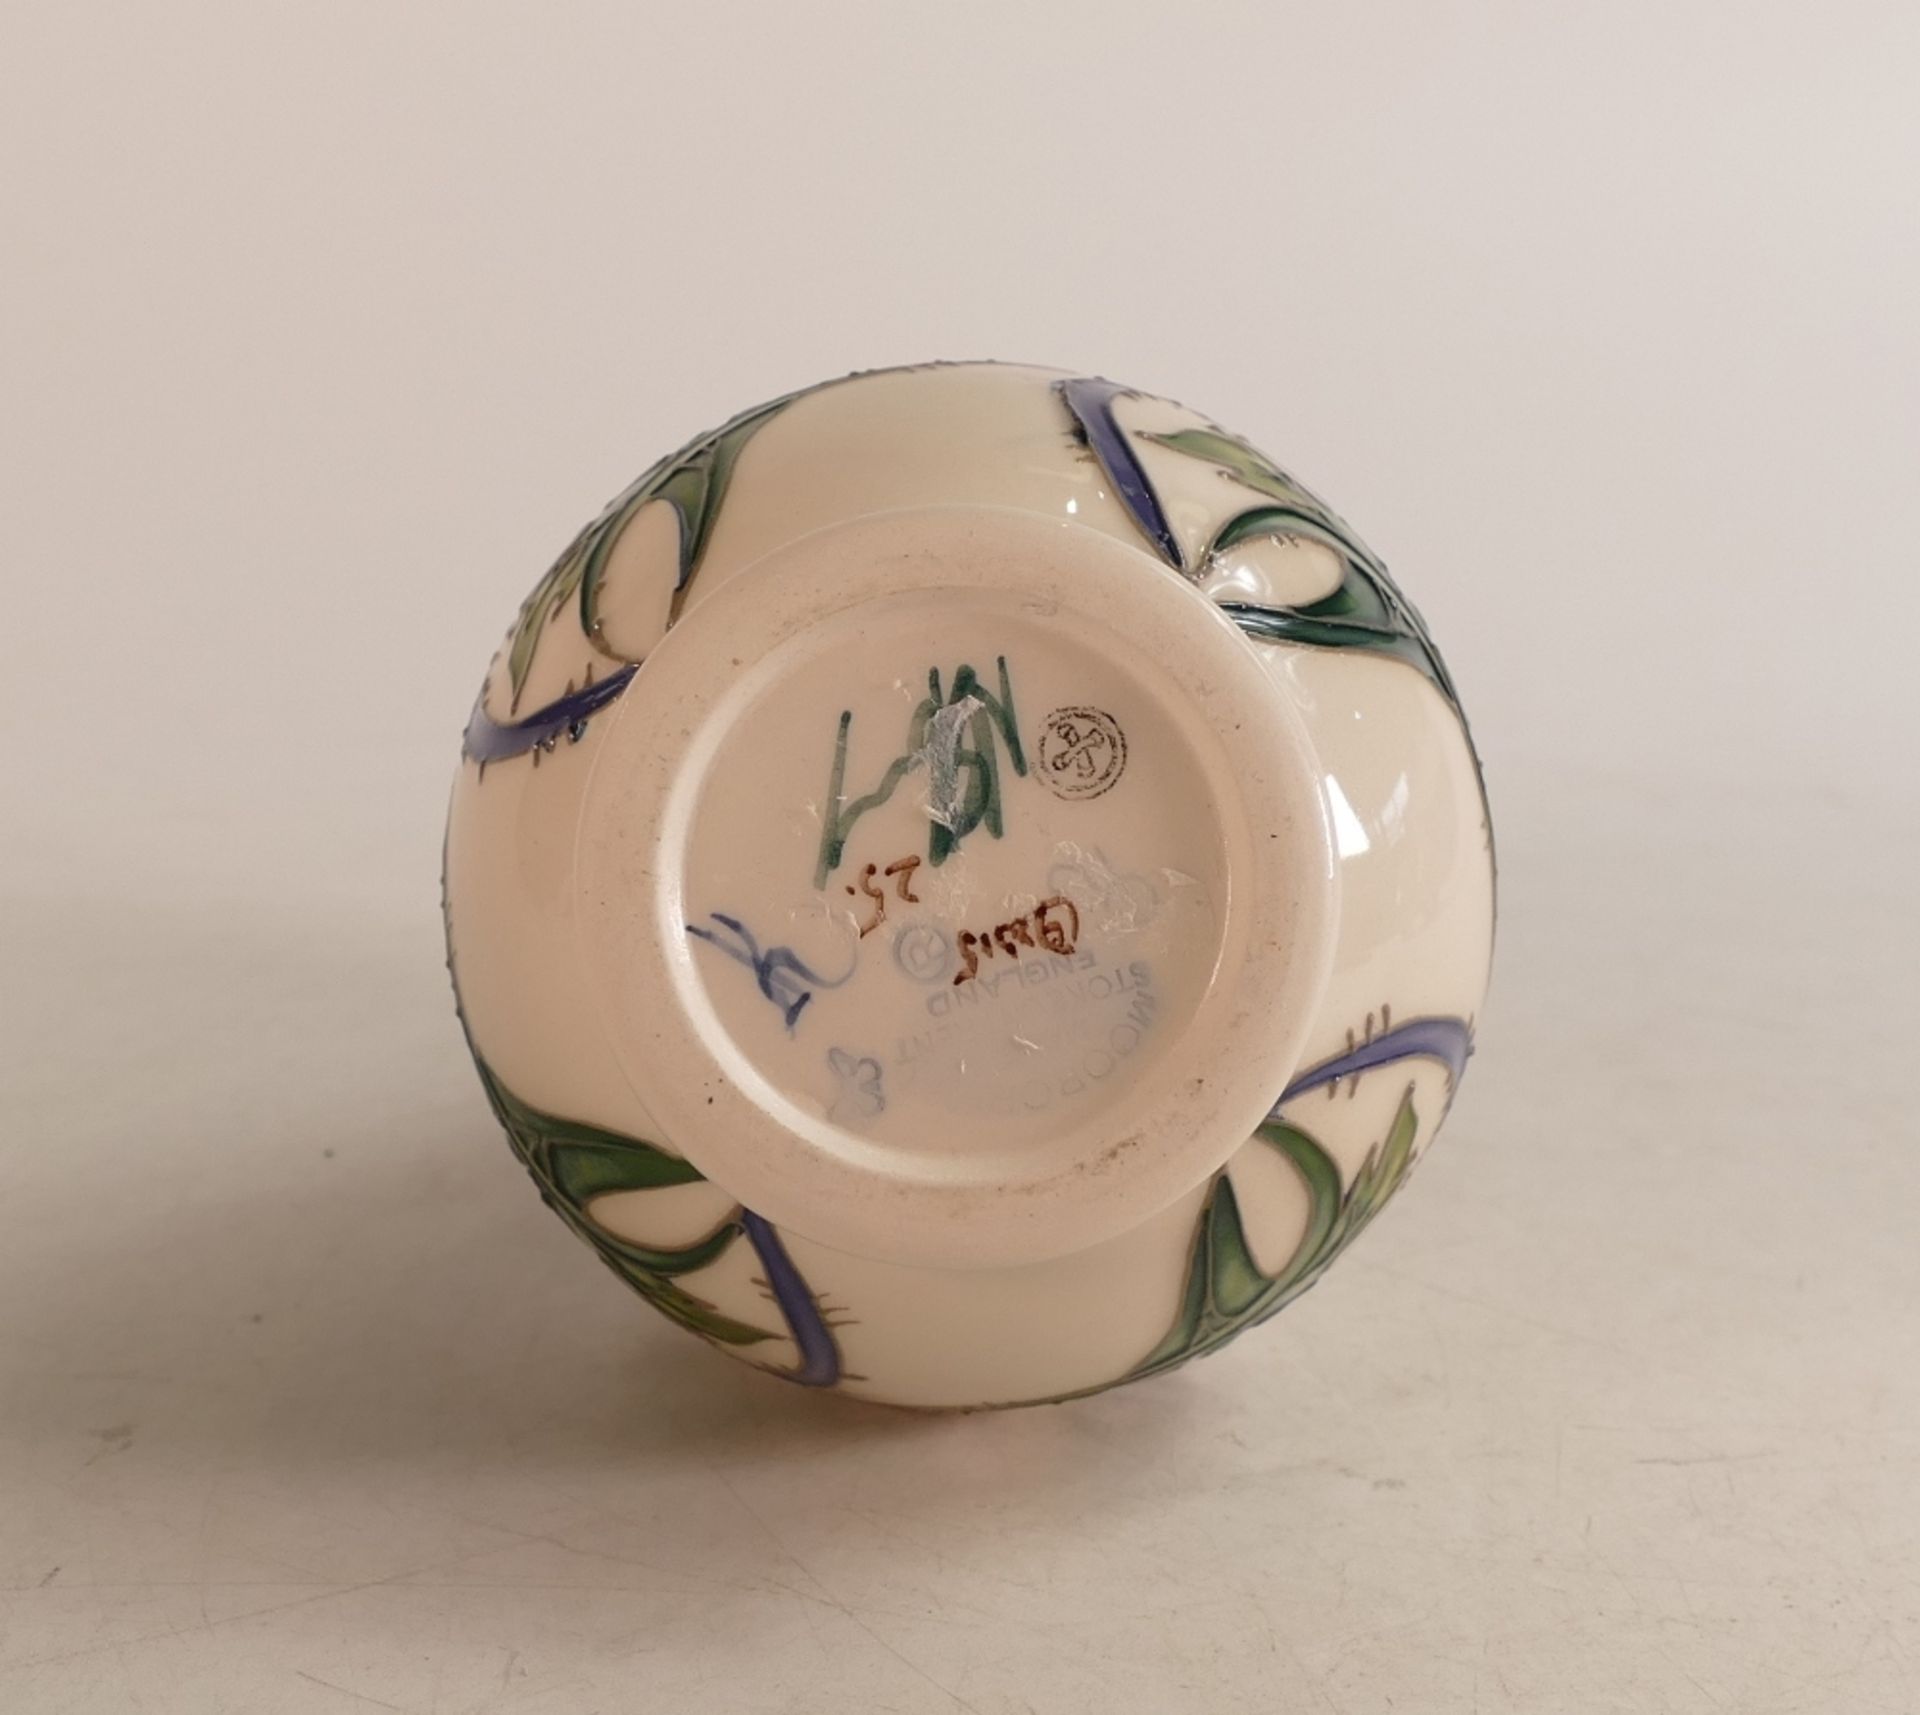 Moorcroft white/ pink floral vase on white/blue faded ground, number edition 25, signed Nicola - Image 2 of 2